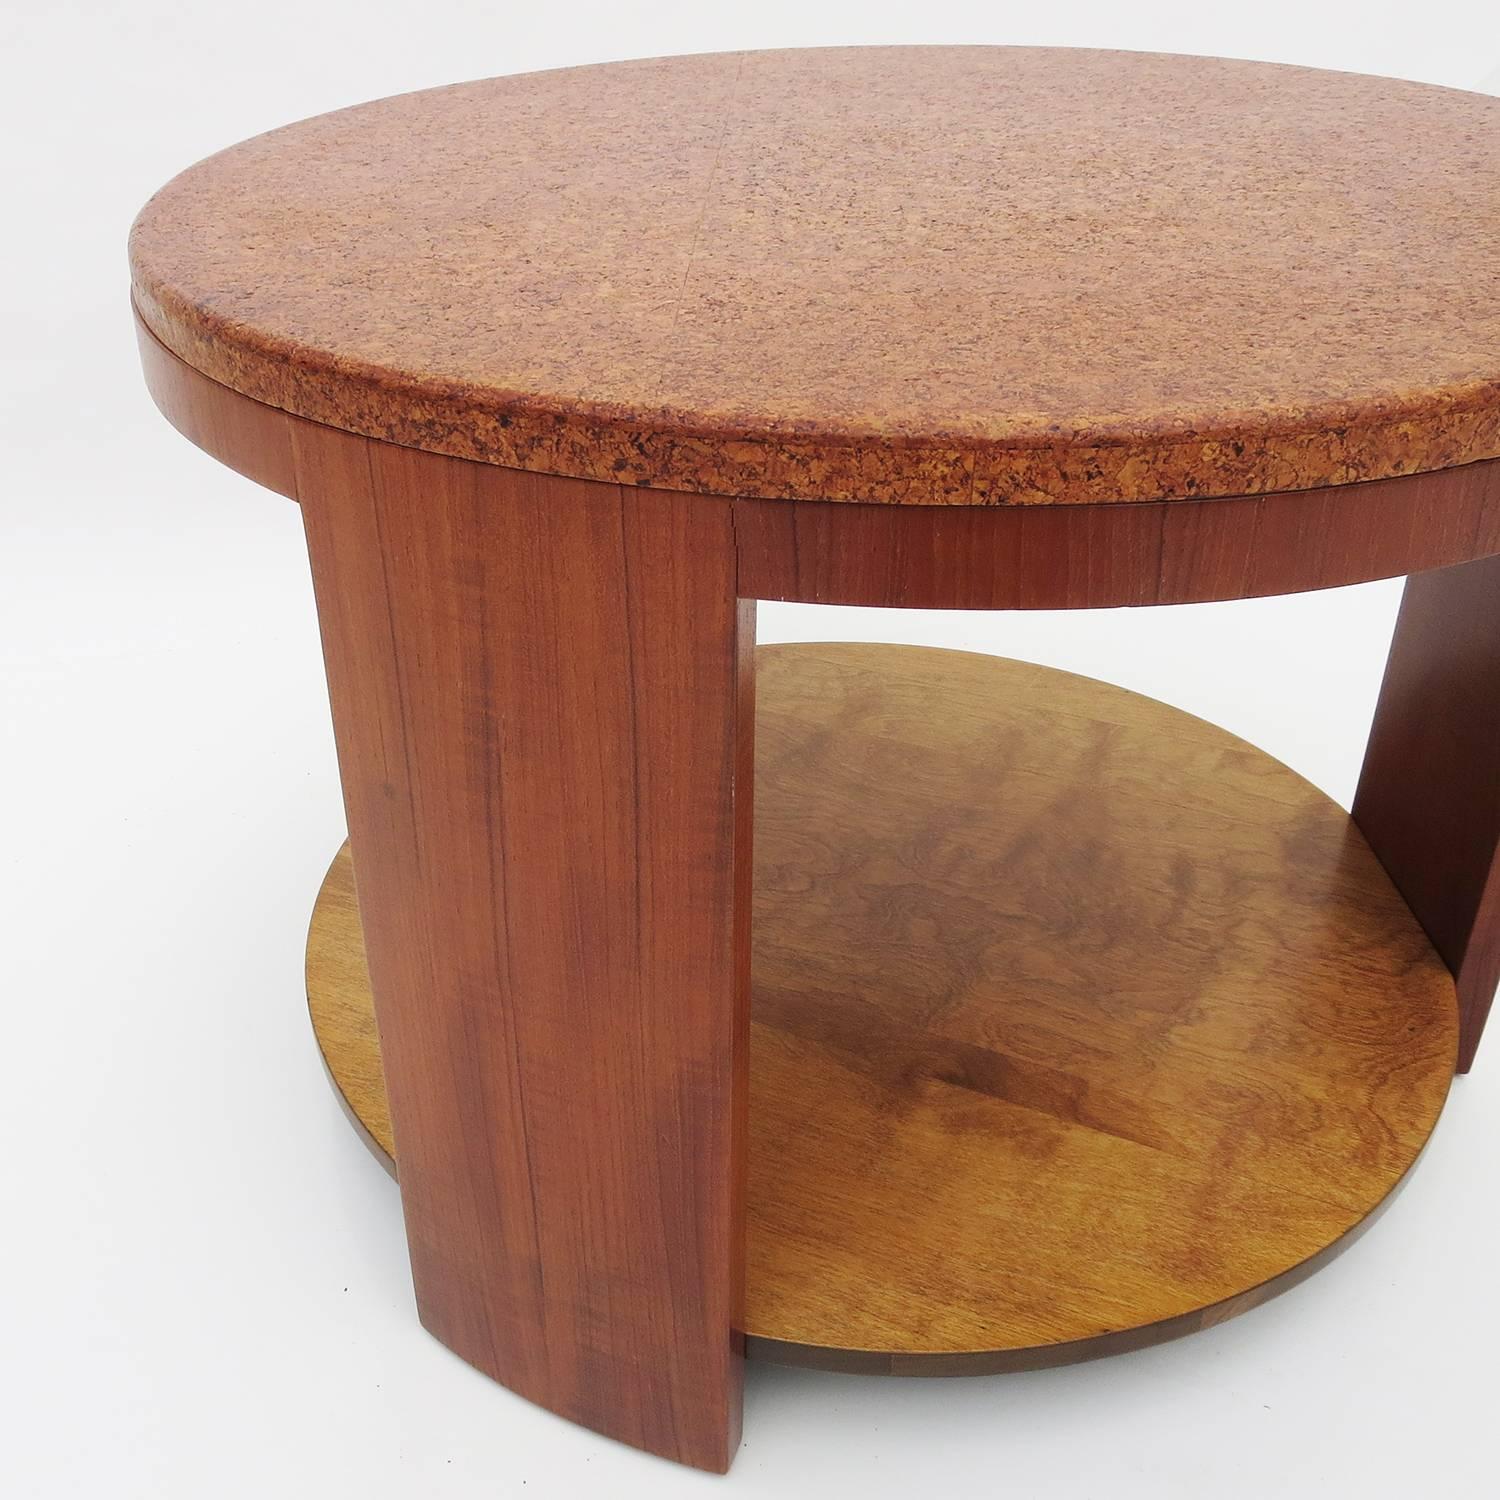 
RETIREMENT SALE!!! EVERYTHING MUST GO - CHECK OUT OUR OTHER ITEMS.	

This lovely design, although unmarked, is very reminiscent of the Paul Frankl designs for the Johnson Furniture Company in the 1940s. The table is a great scale as a lamp table,